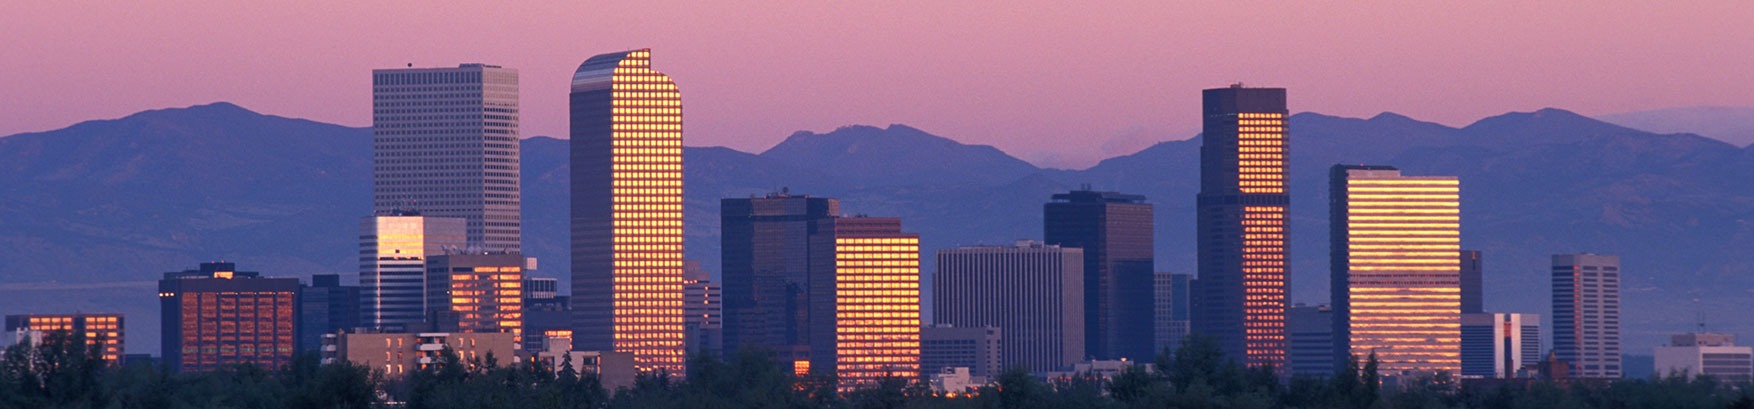 City skyline in an area served by Colorado personal injury attorney Super Woman Super Lawyer